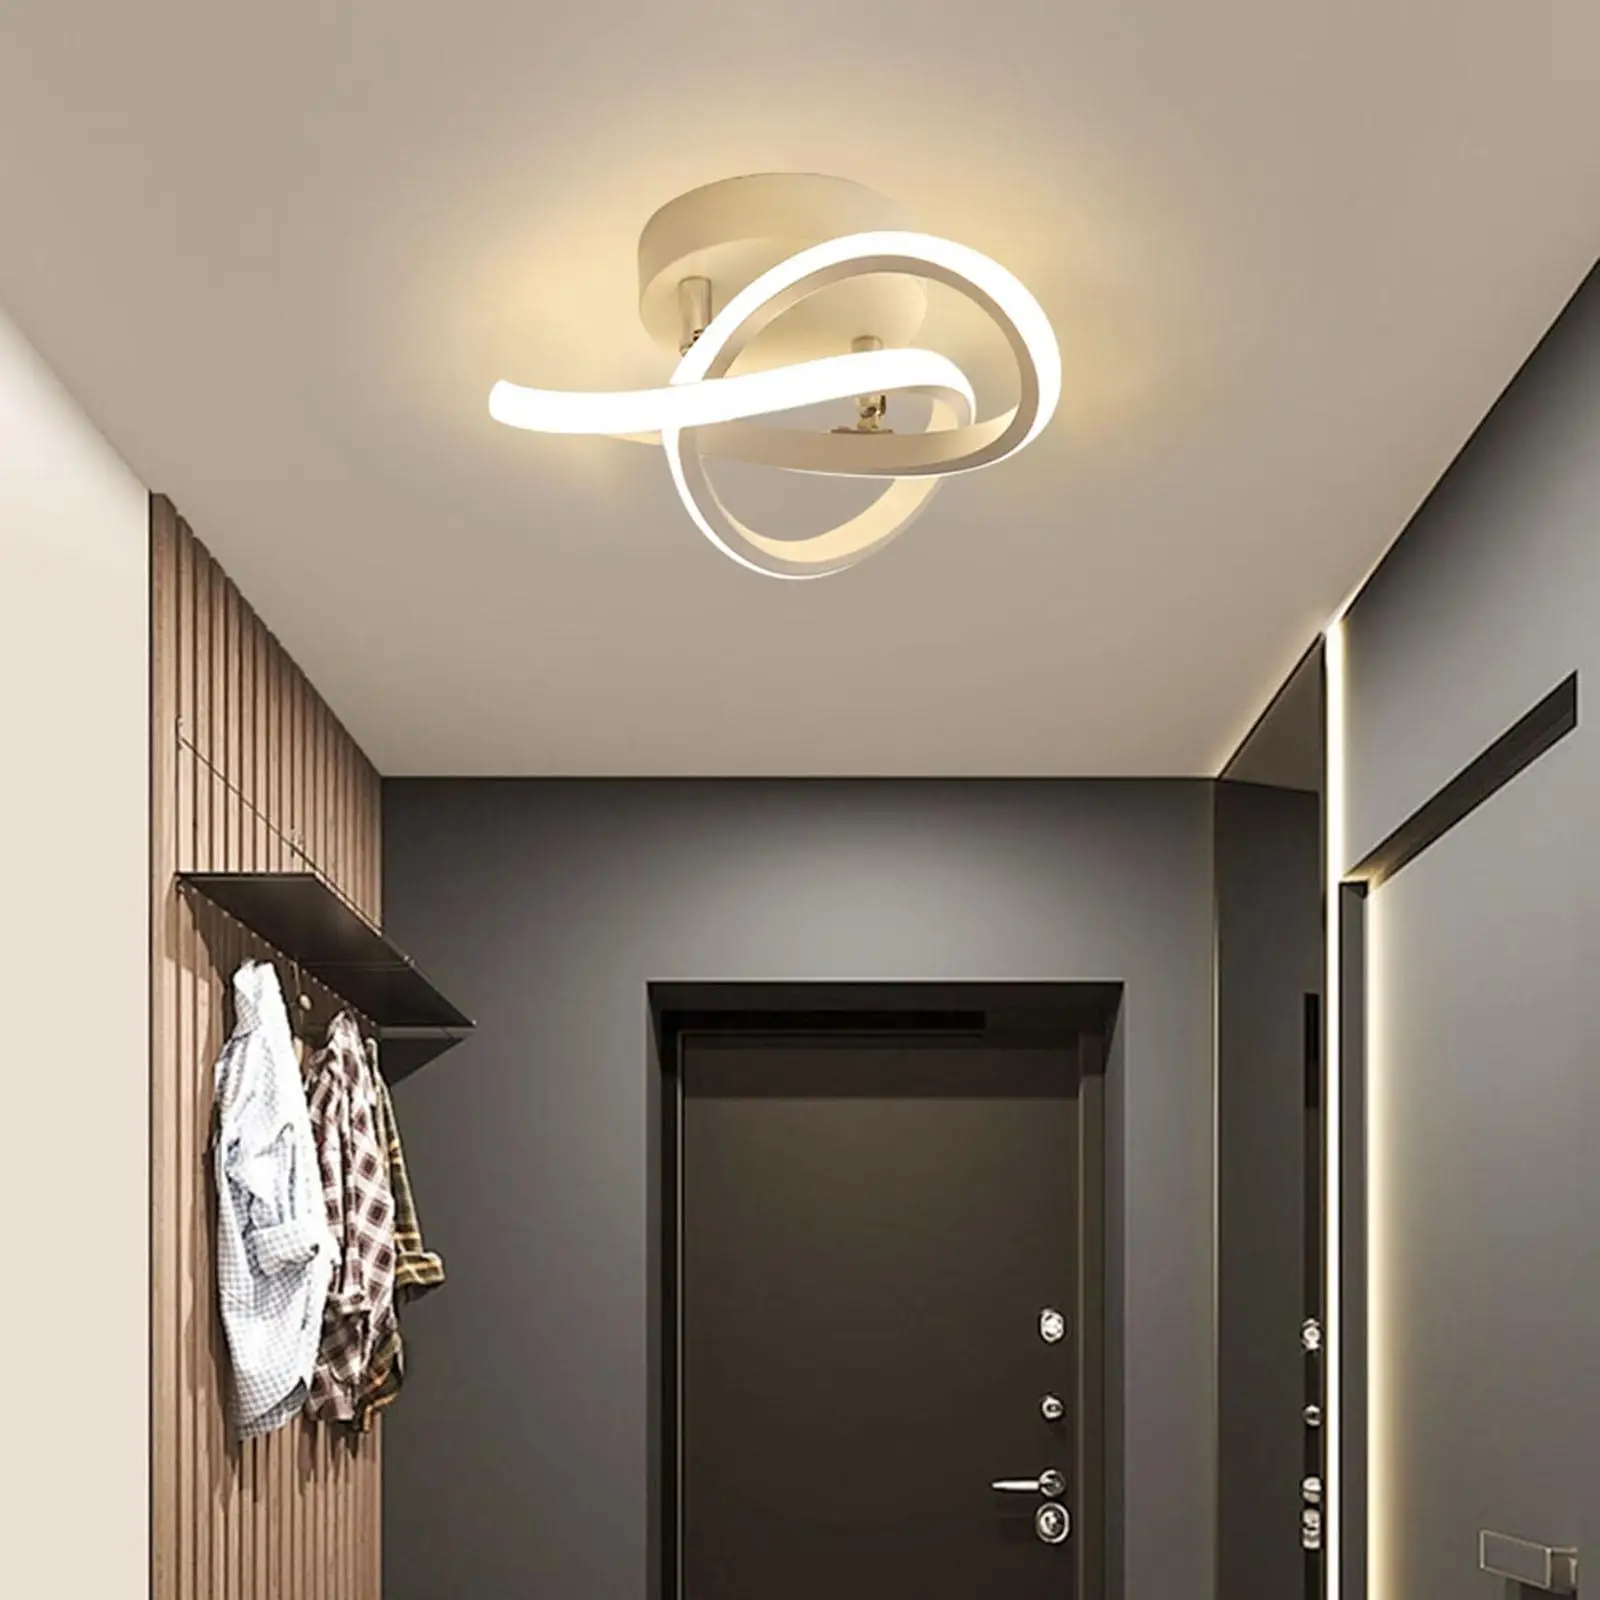 Modern Ceiling Light Fixture LED Ceiling Lamp for Bathroom Porch, Ceiling Lamp for Kitchen, Bedroom, Hallway Decoration